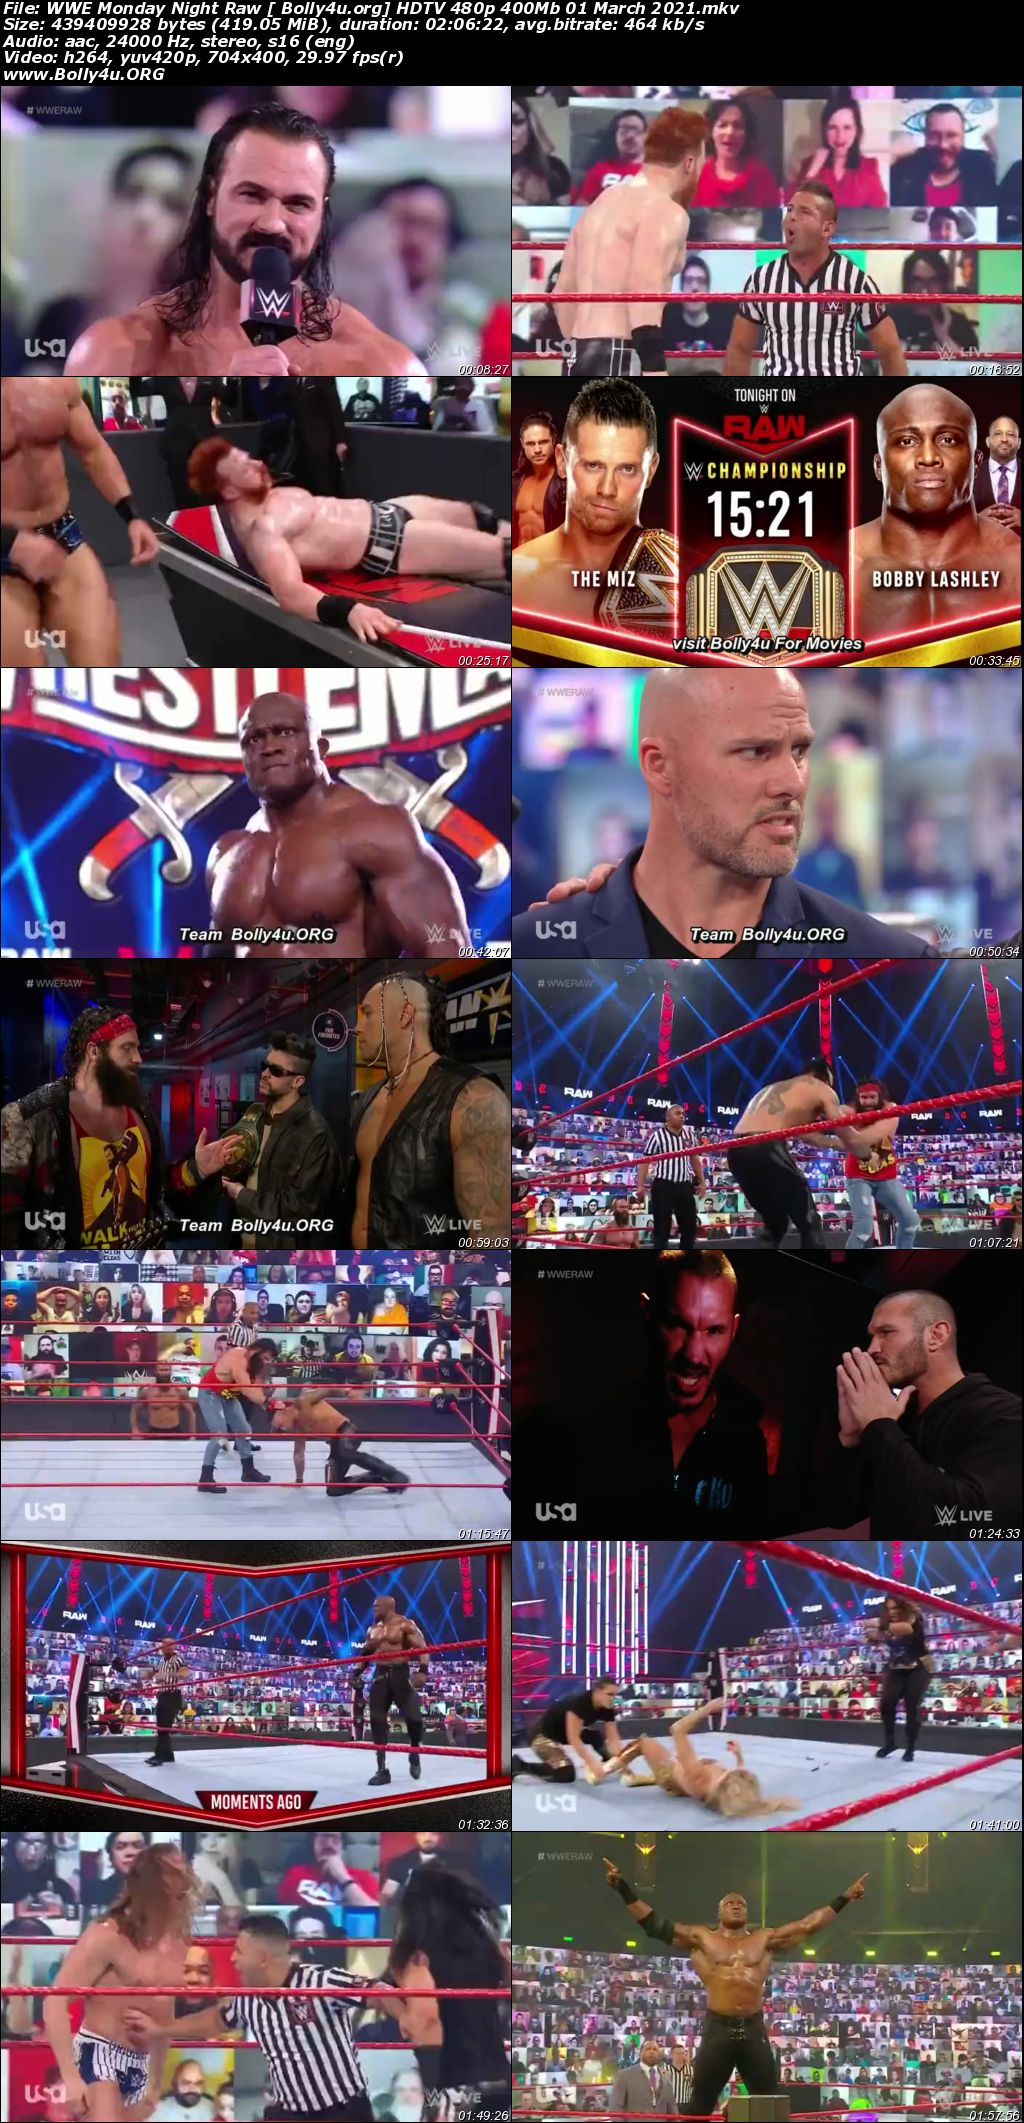 WWE Monday Night Raw HDTV 480p 400Mb 01 March 2021 Download